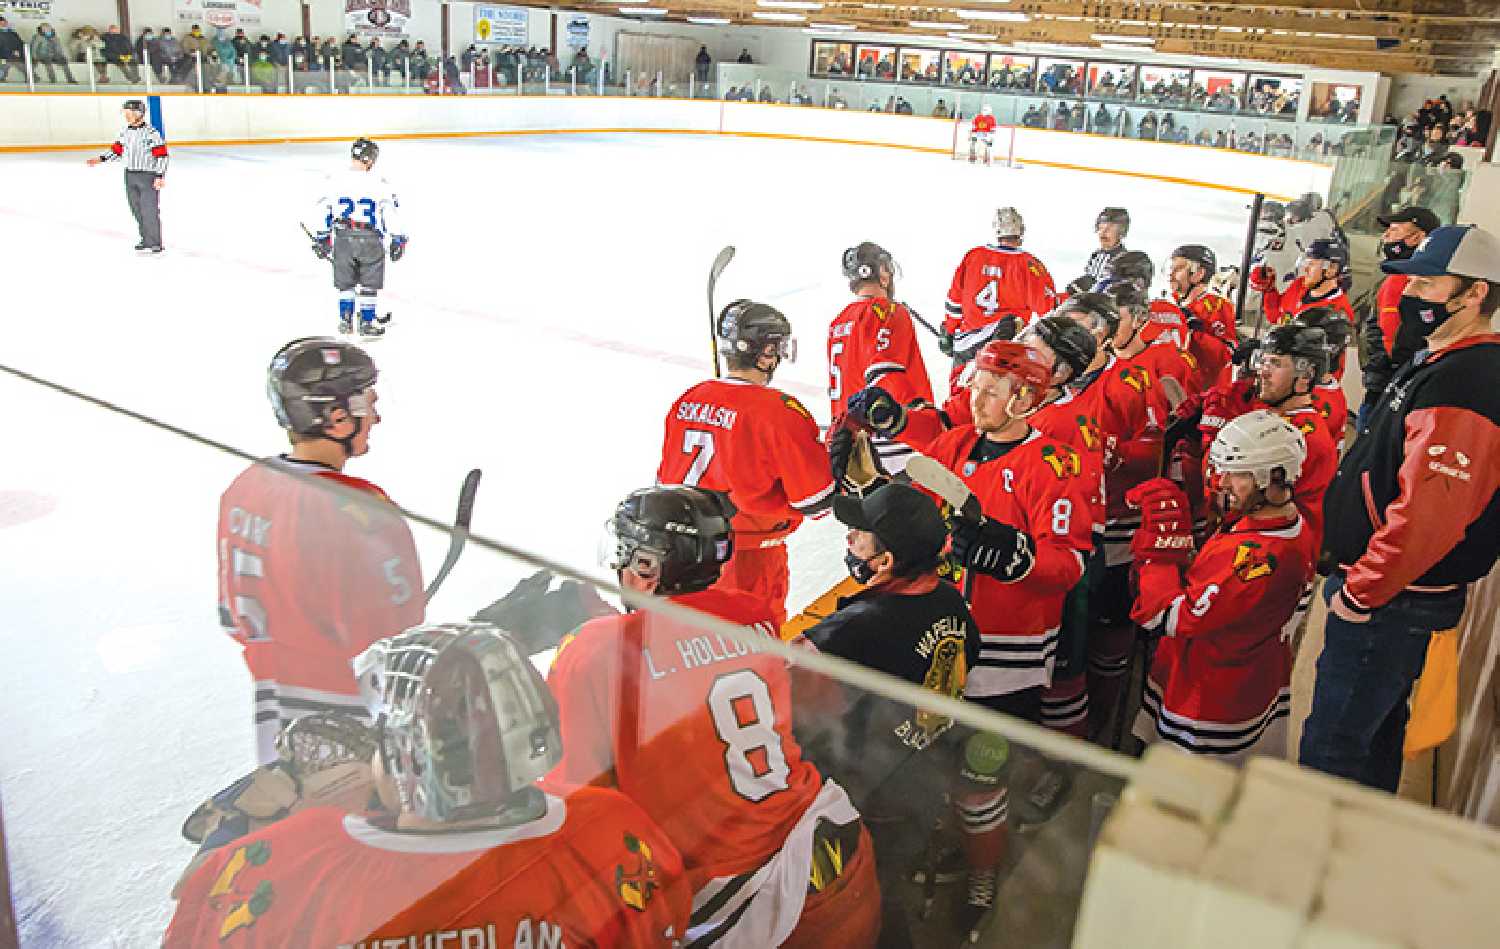 Moosomin Rangers players with Wapella Blackhawks jerseys during a game held at the Wapella rink last winter to honor the Wapella Blackhawks. Many of the Blackhawks alumni players were on hand at the game, some of them watching young relatives or immediate family members on the ice that night. Kim Poole photo.